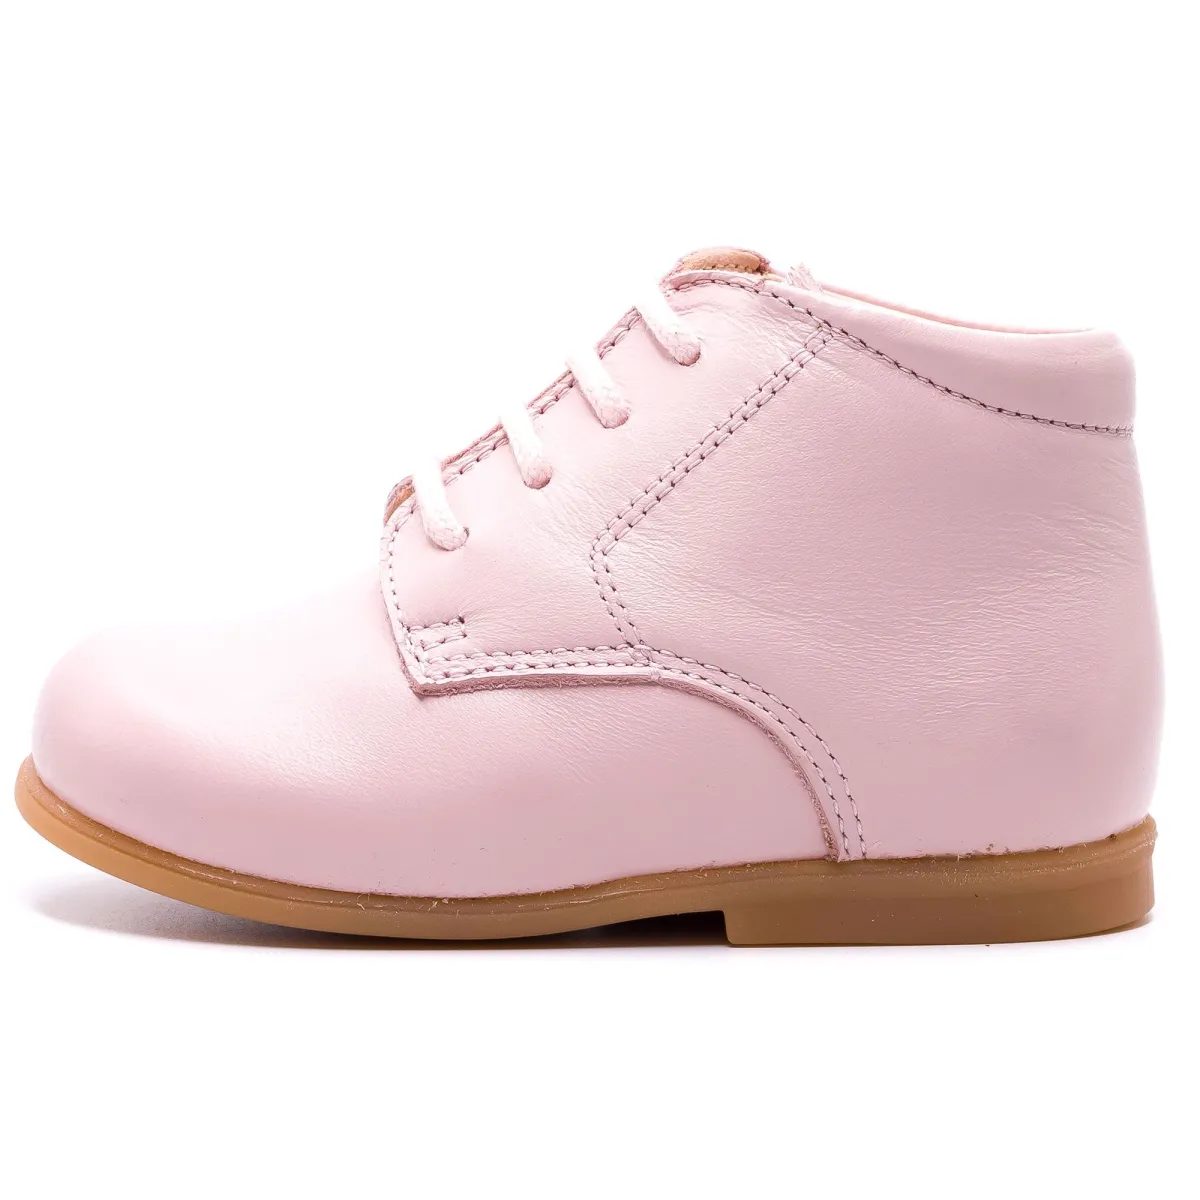 Boni Baby – First-step shoes for babies